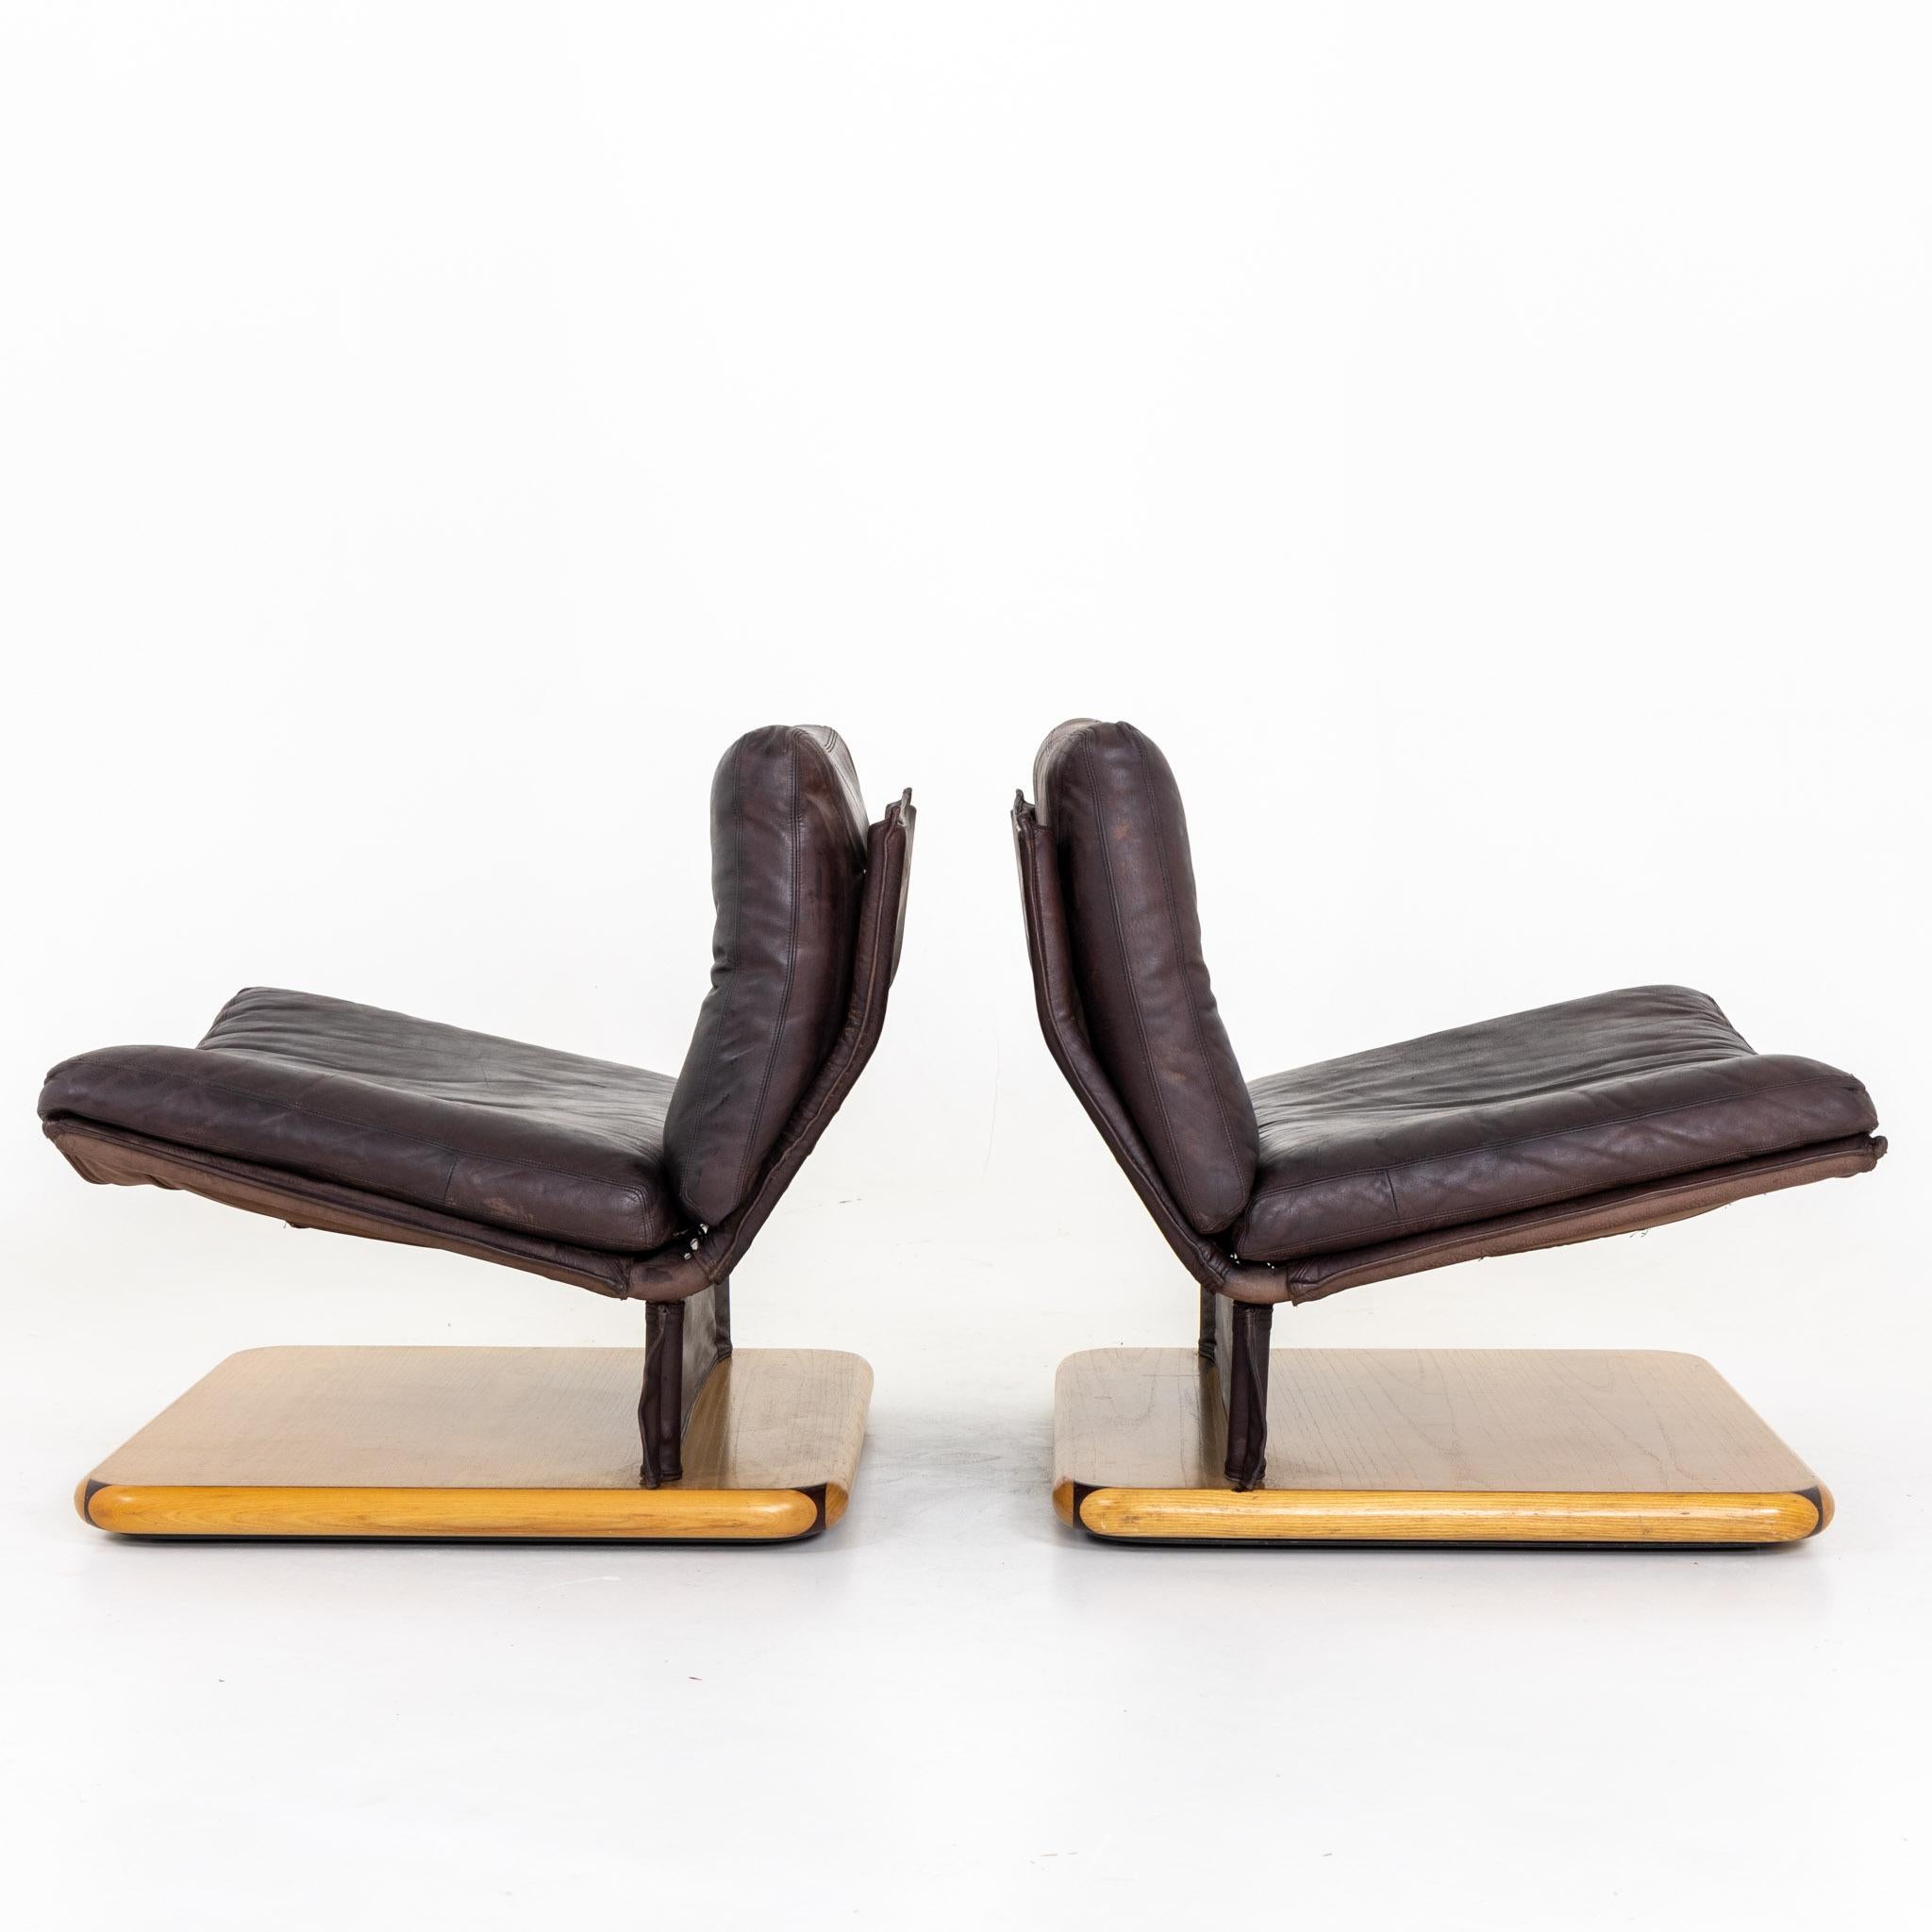 Pair of lounge chairs on rectangular veneered bases and seat covered with brown leather. Inscribed on the bottom: dipo, S. Omero-Teramo-Italia, mod. Gionata. Signs of age and use.